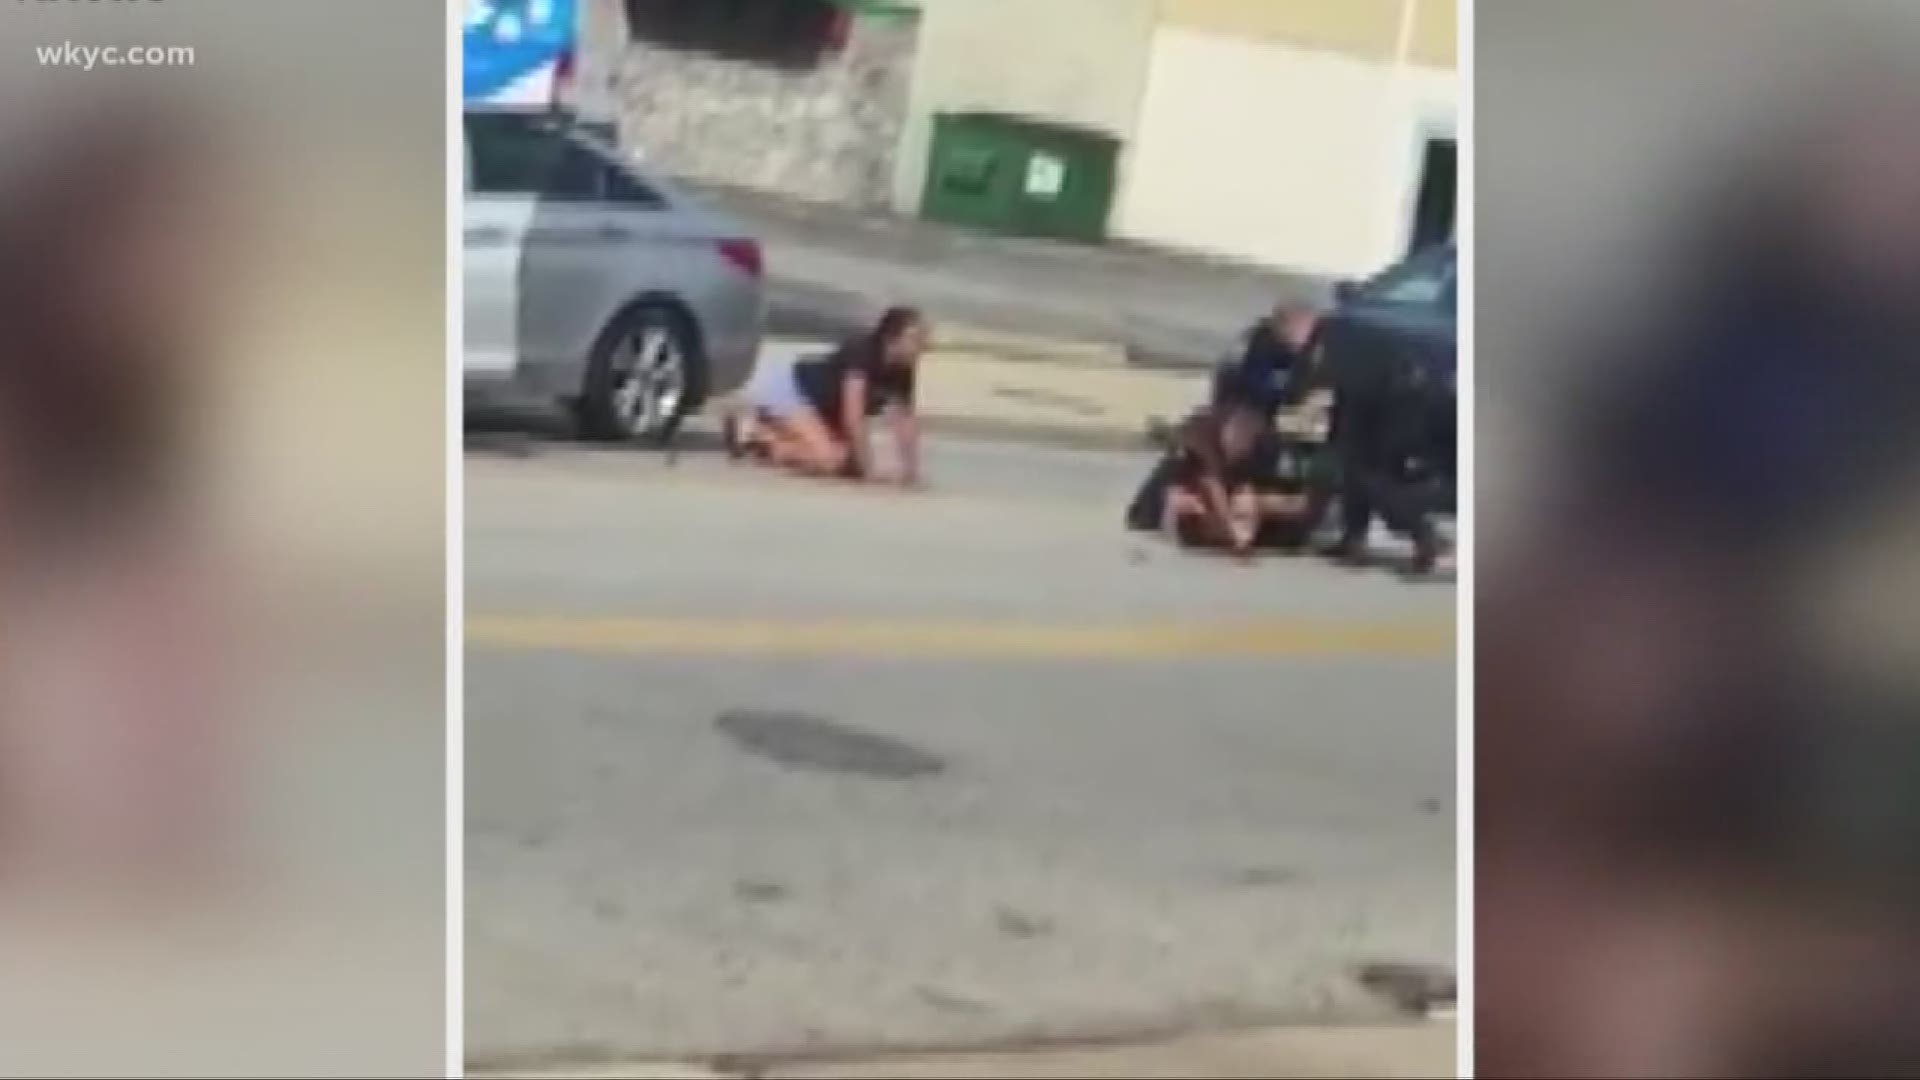 Euclid police officer fired for excessive force in viral video has been reinstated